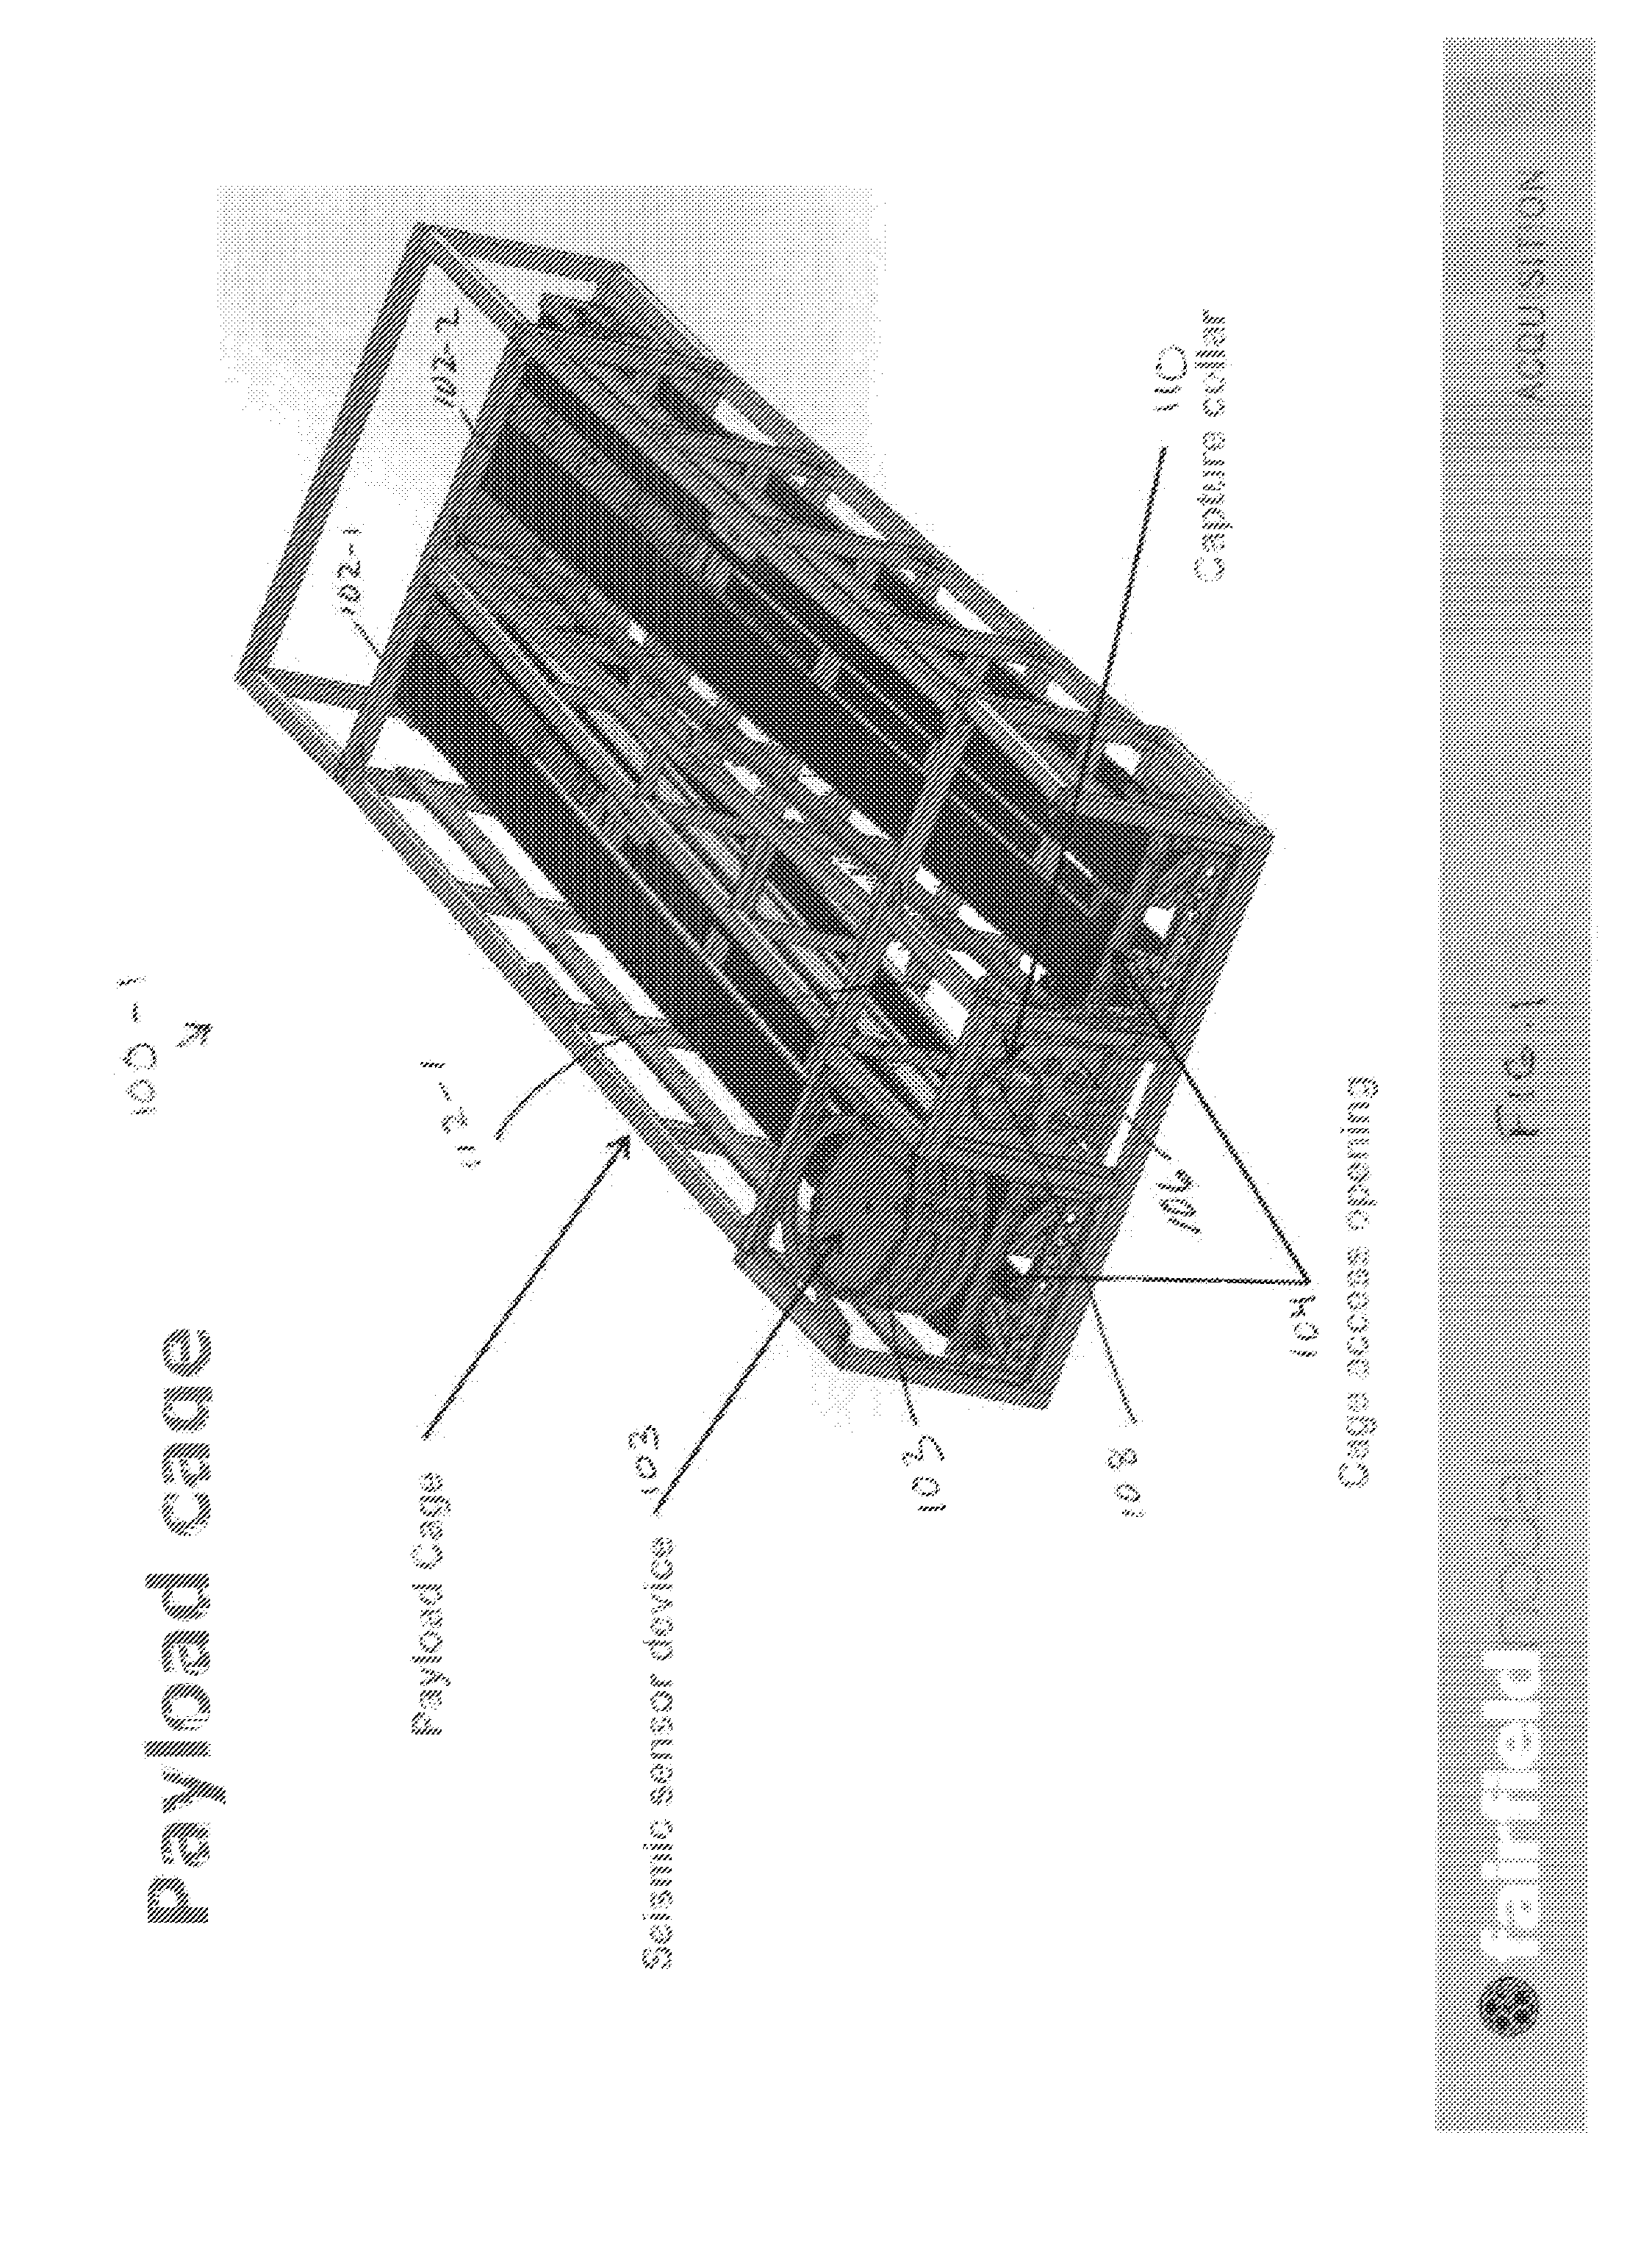 Capture and docking apparatus, method, and applications